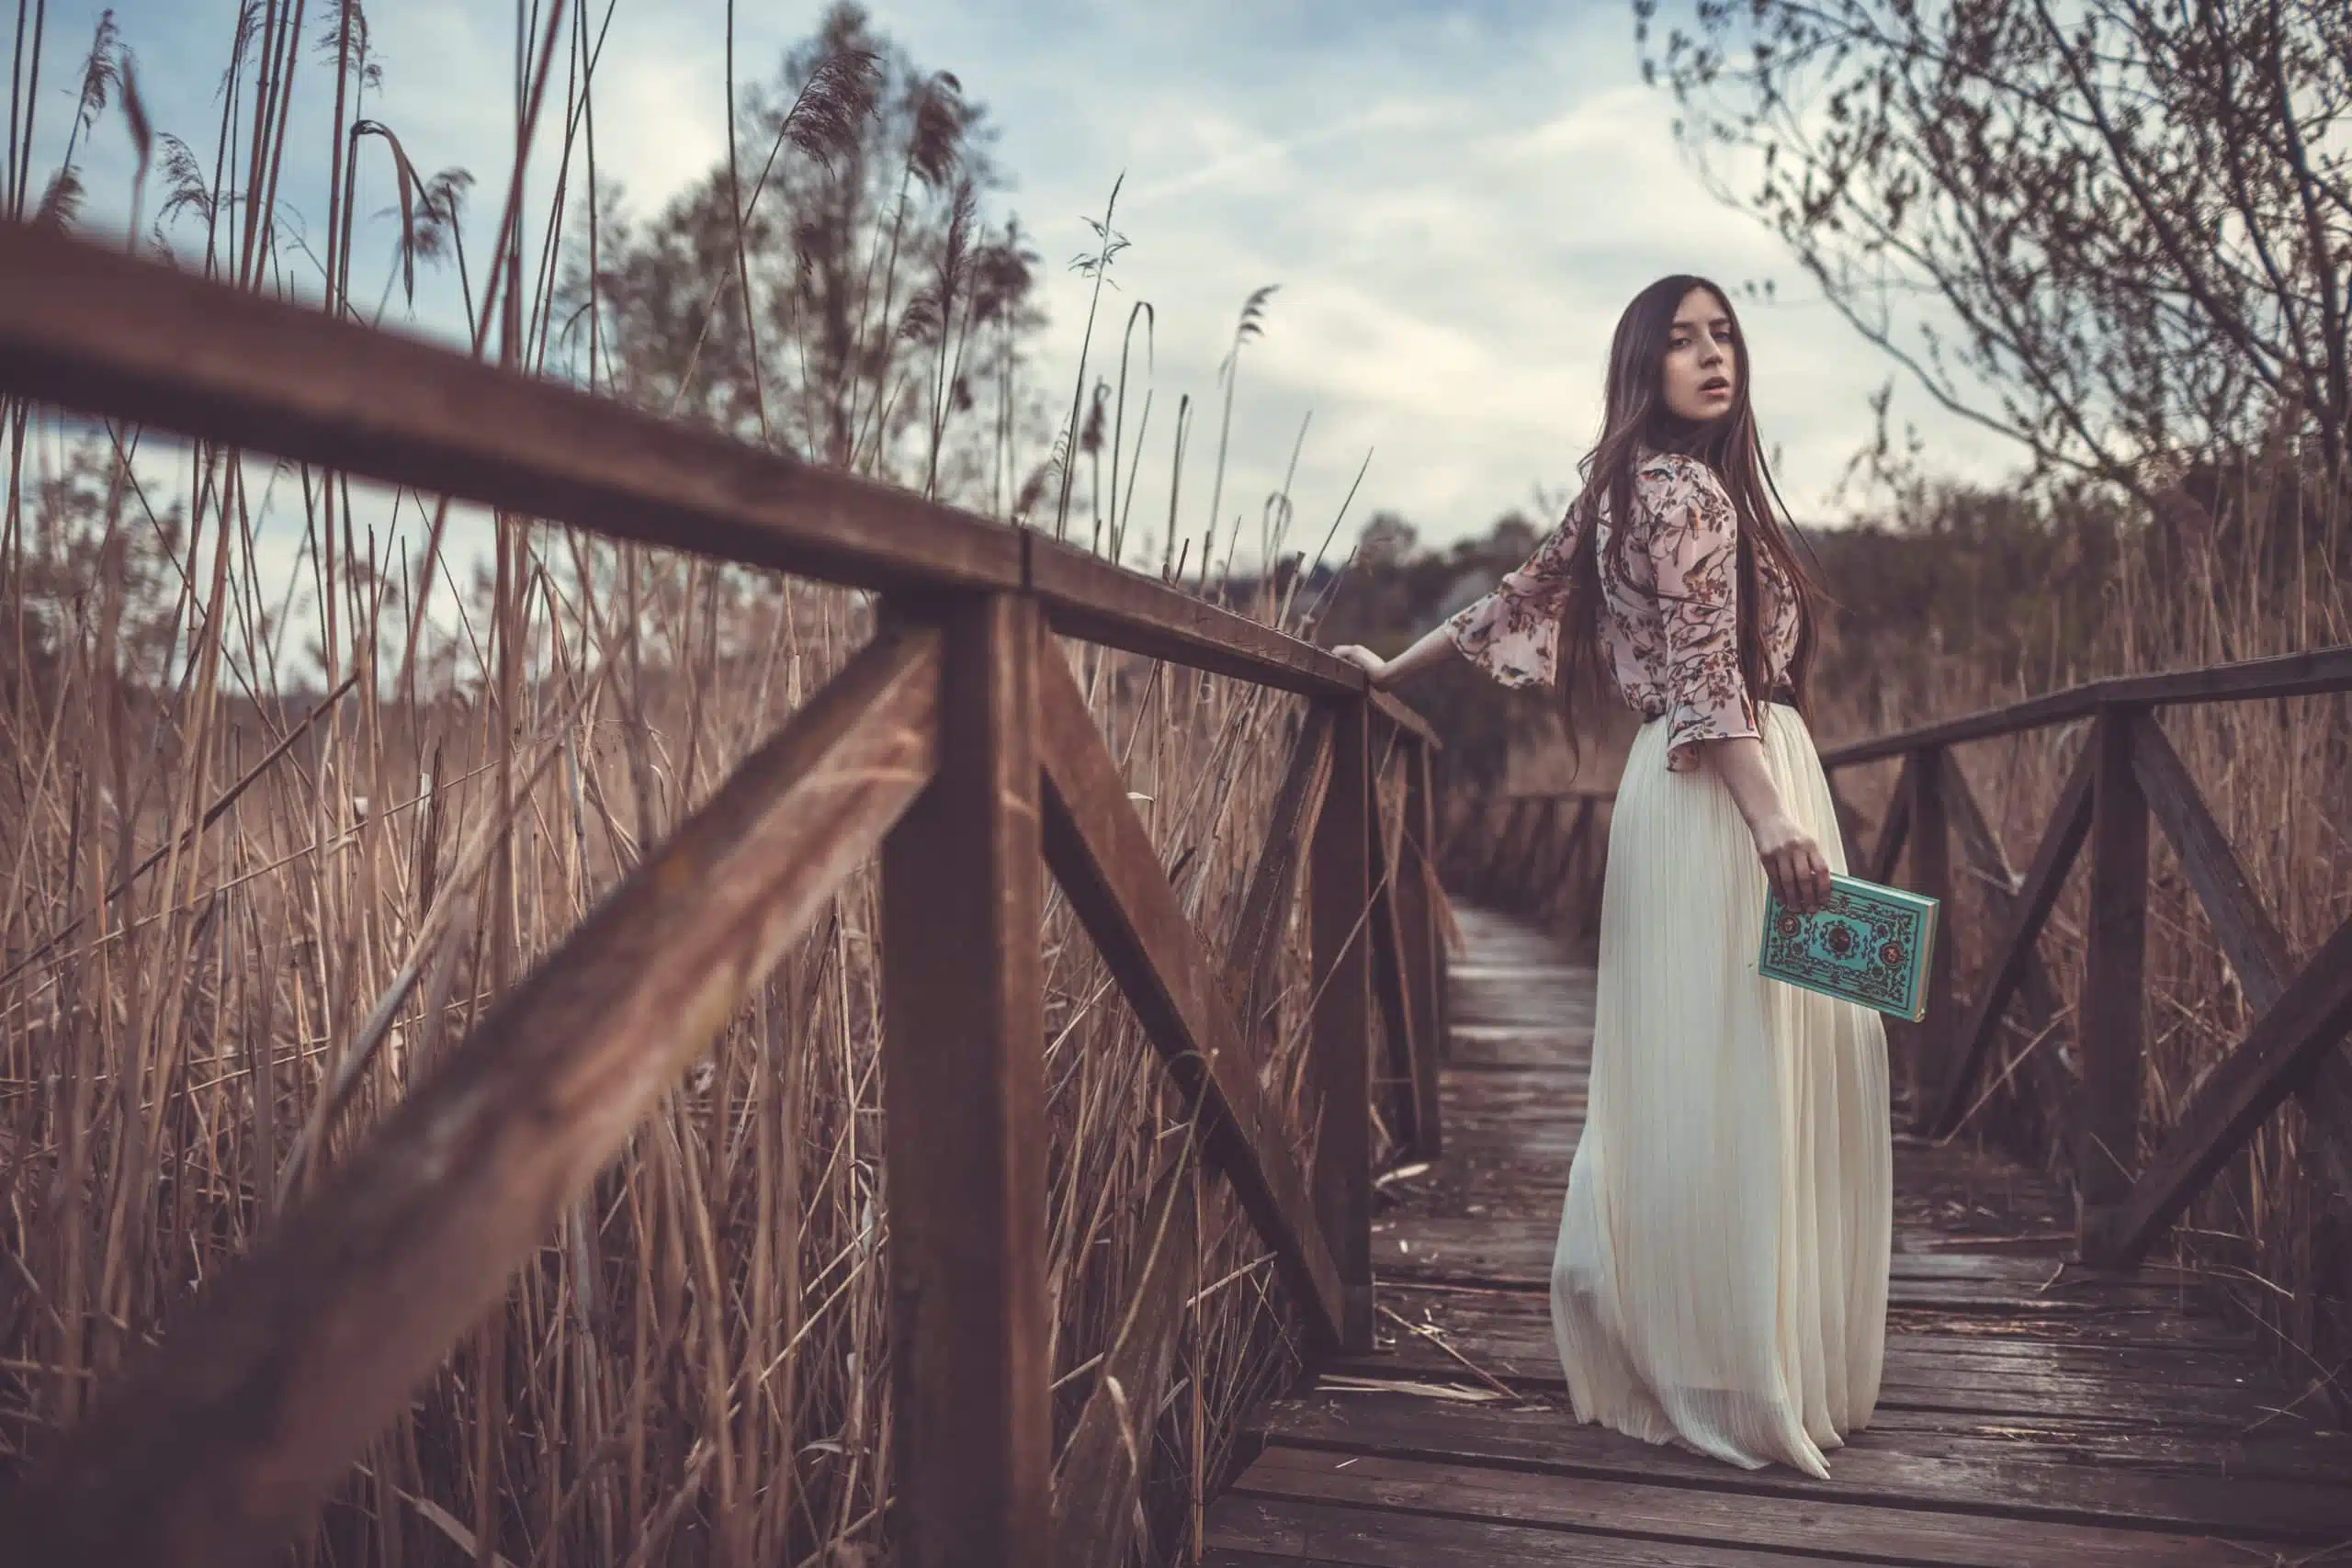 Beautiful young woman holding a book, walking on a wooden bridge.